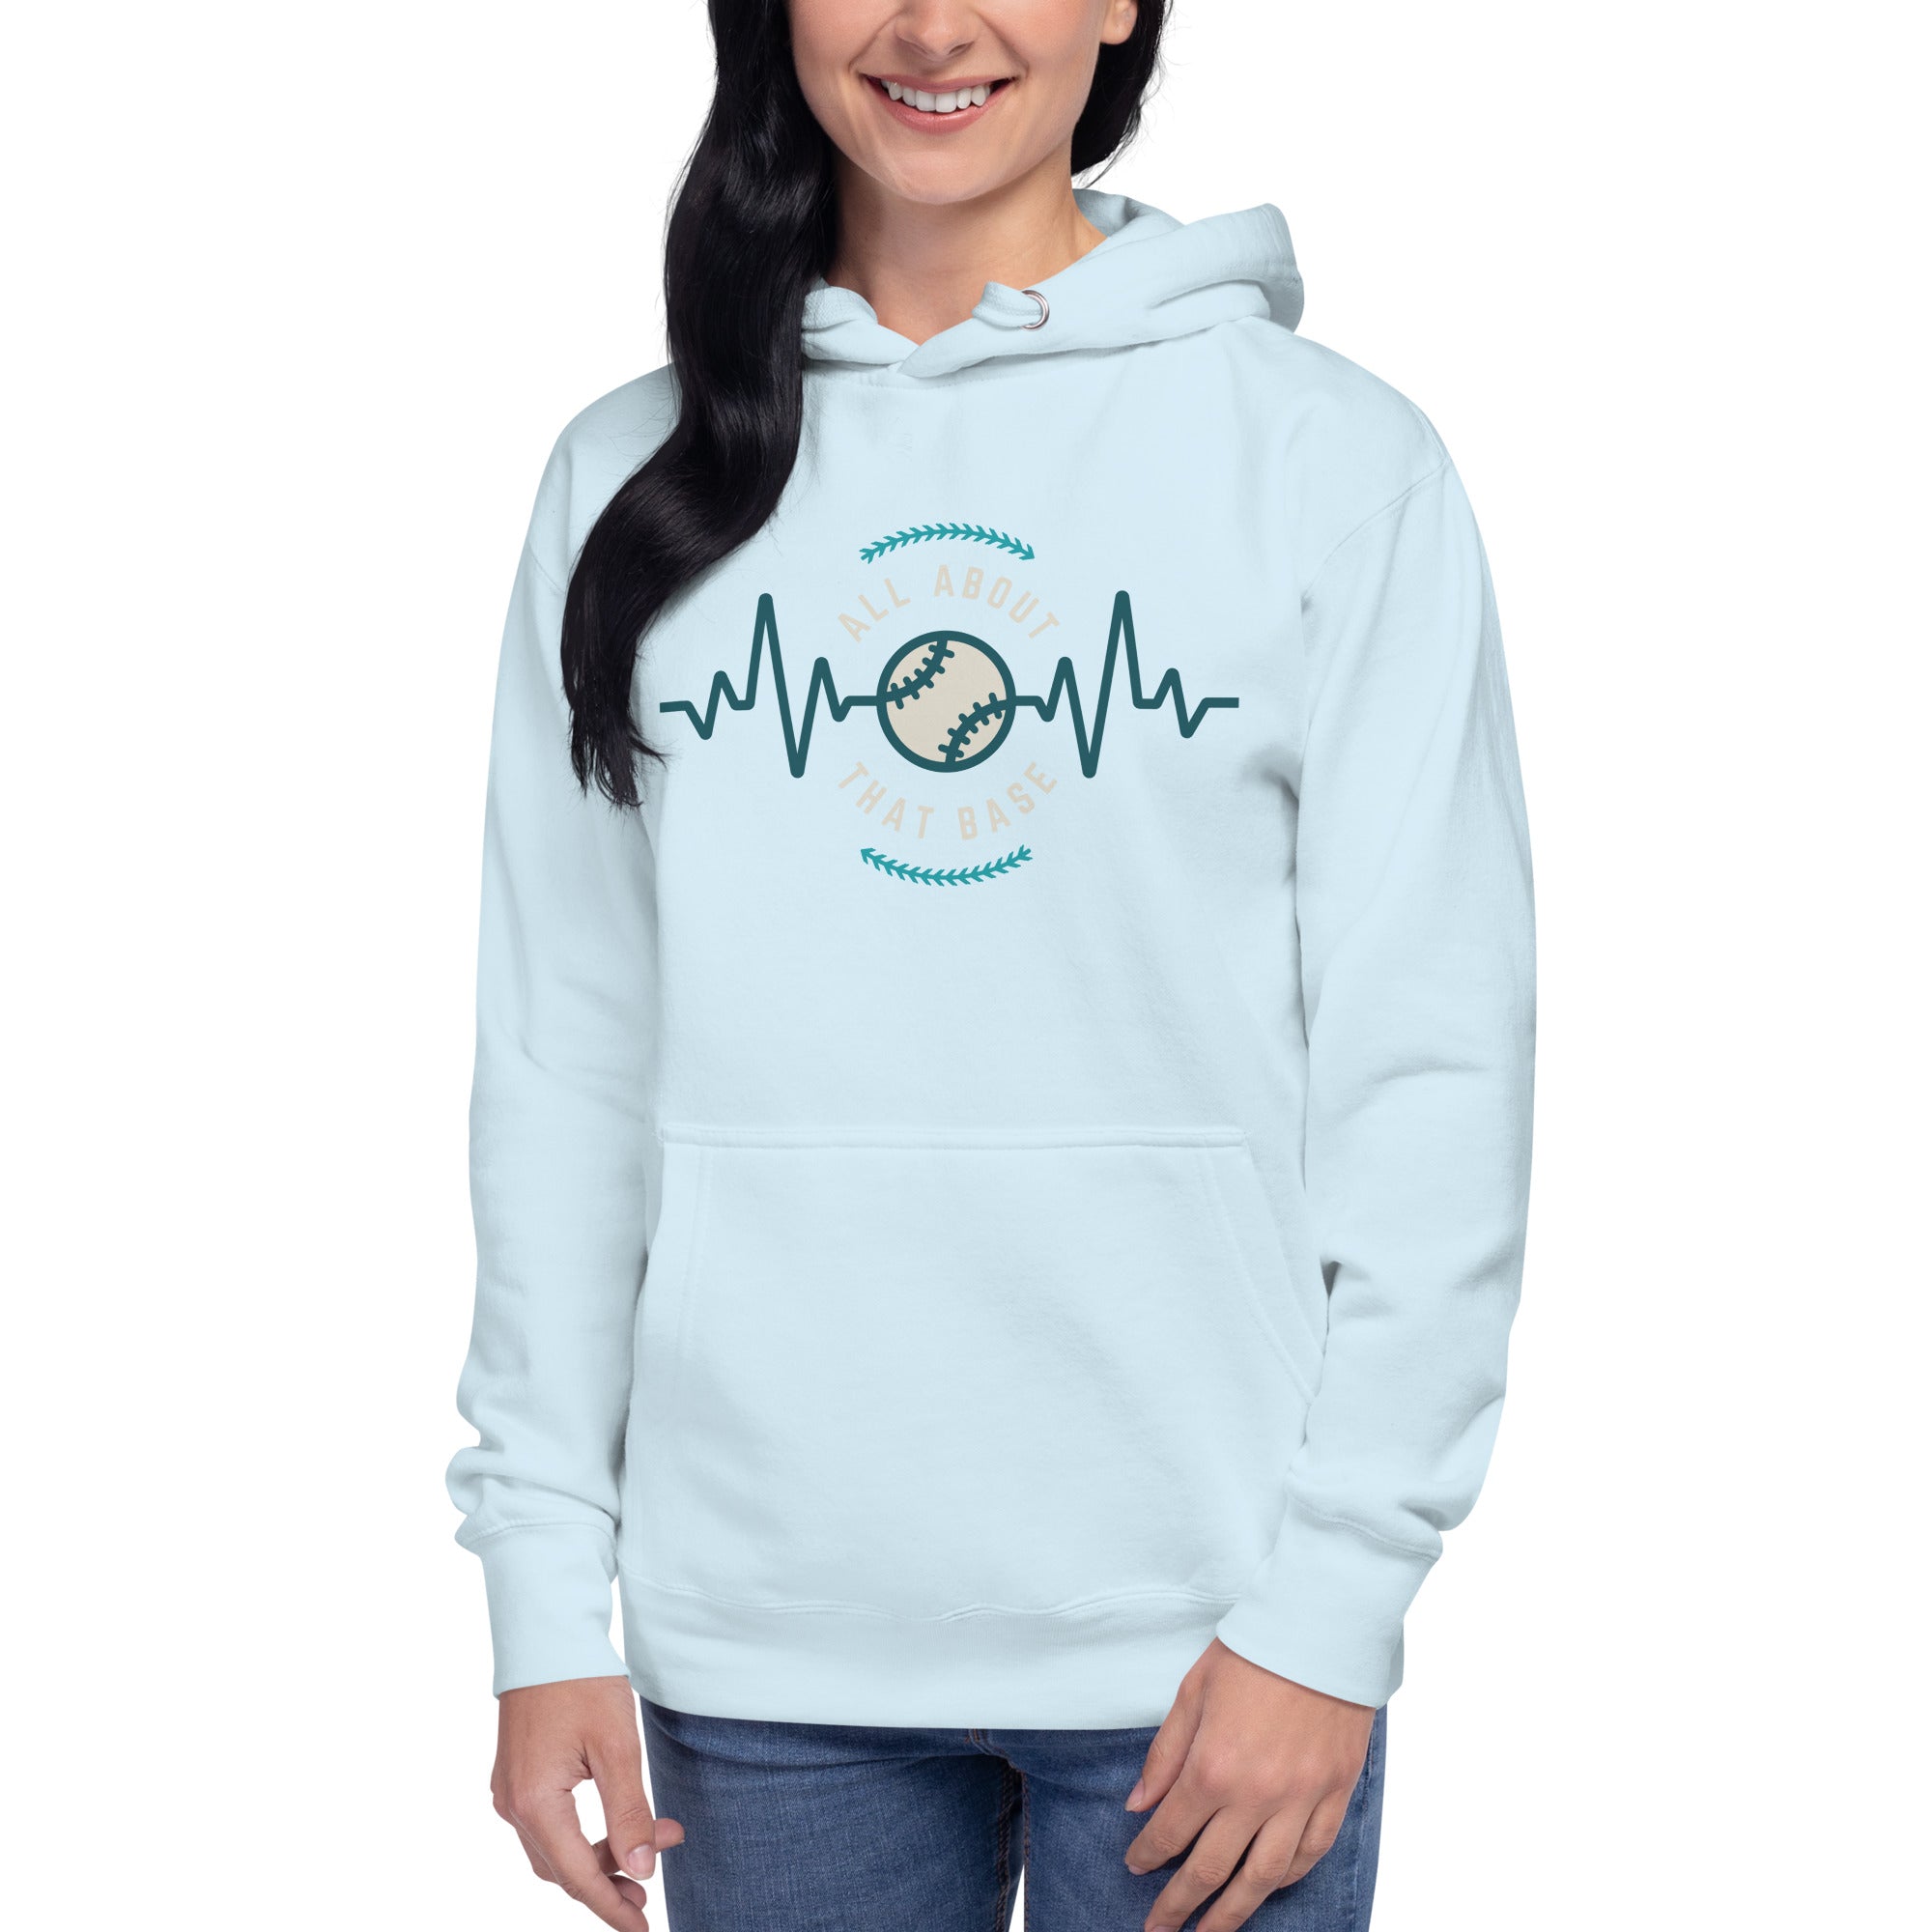 All About That Base Women's Heavy Hoodie